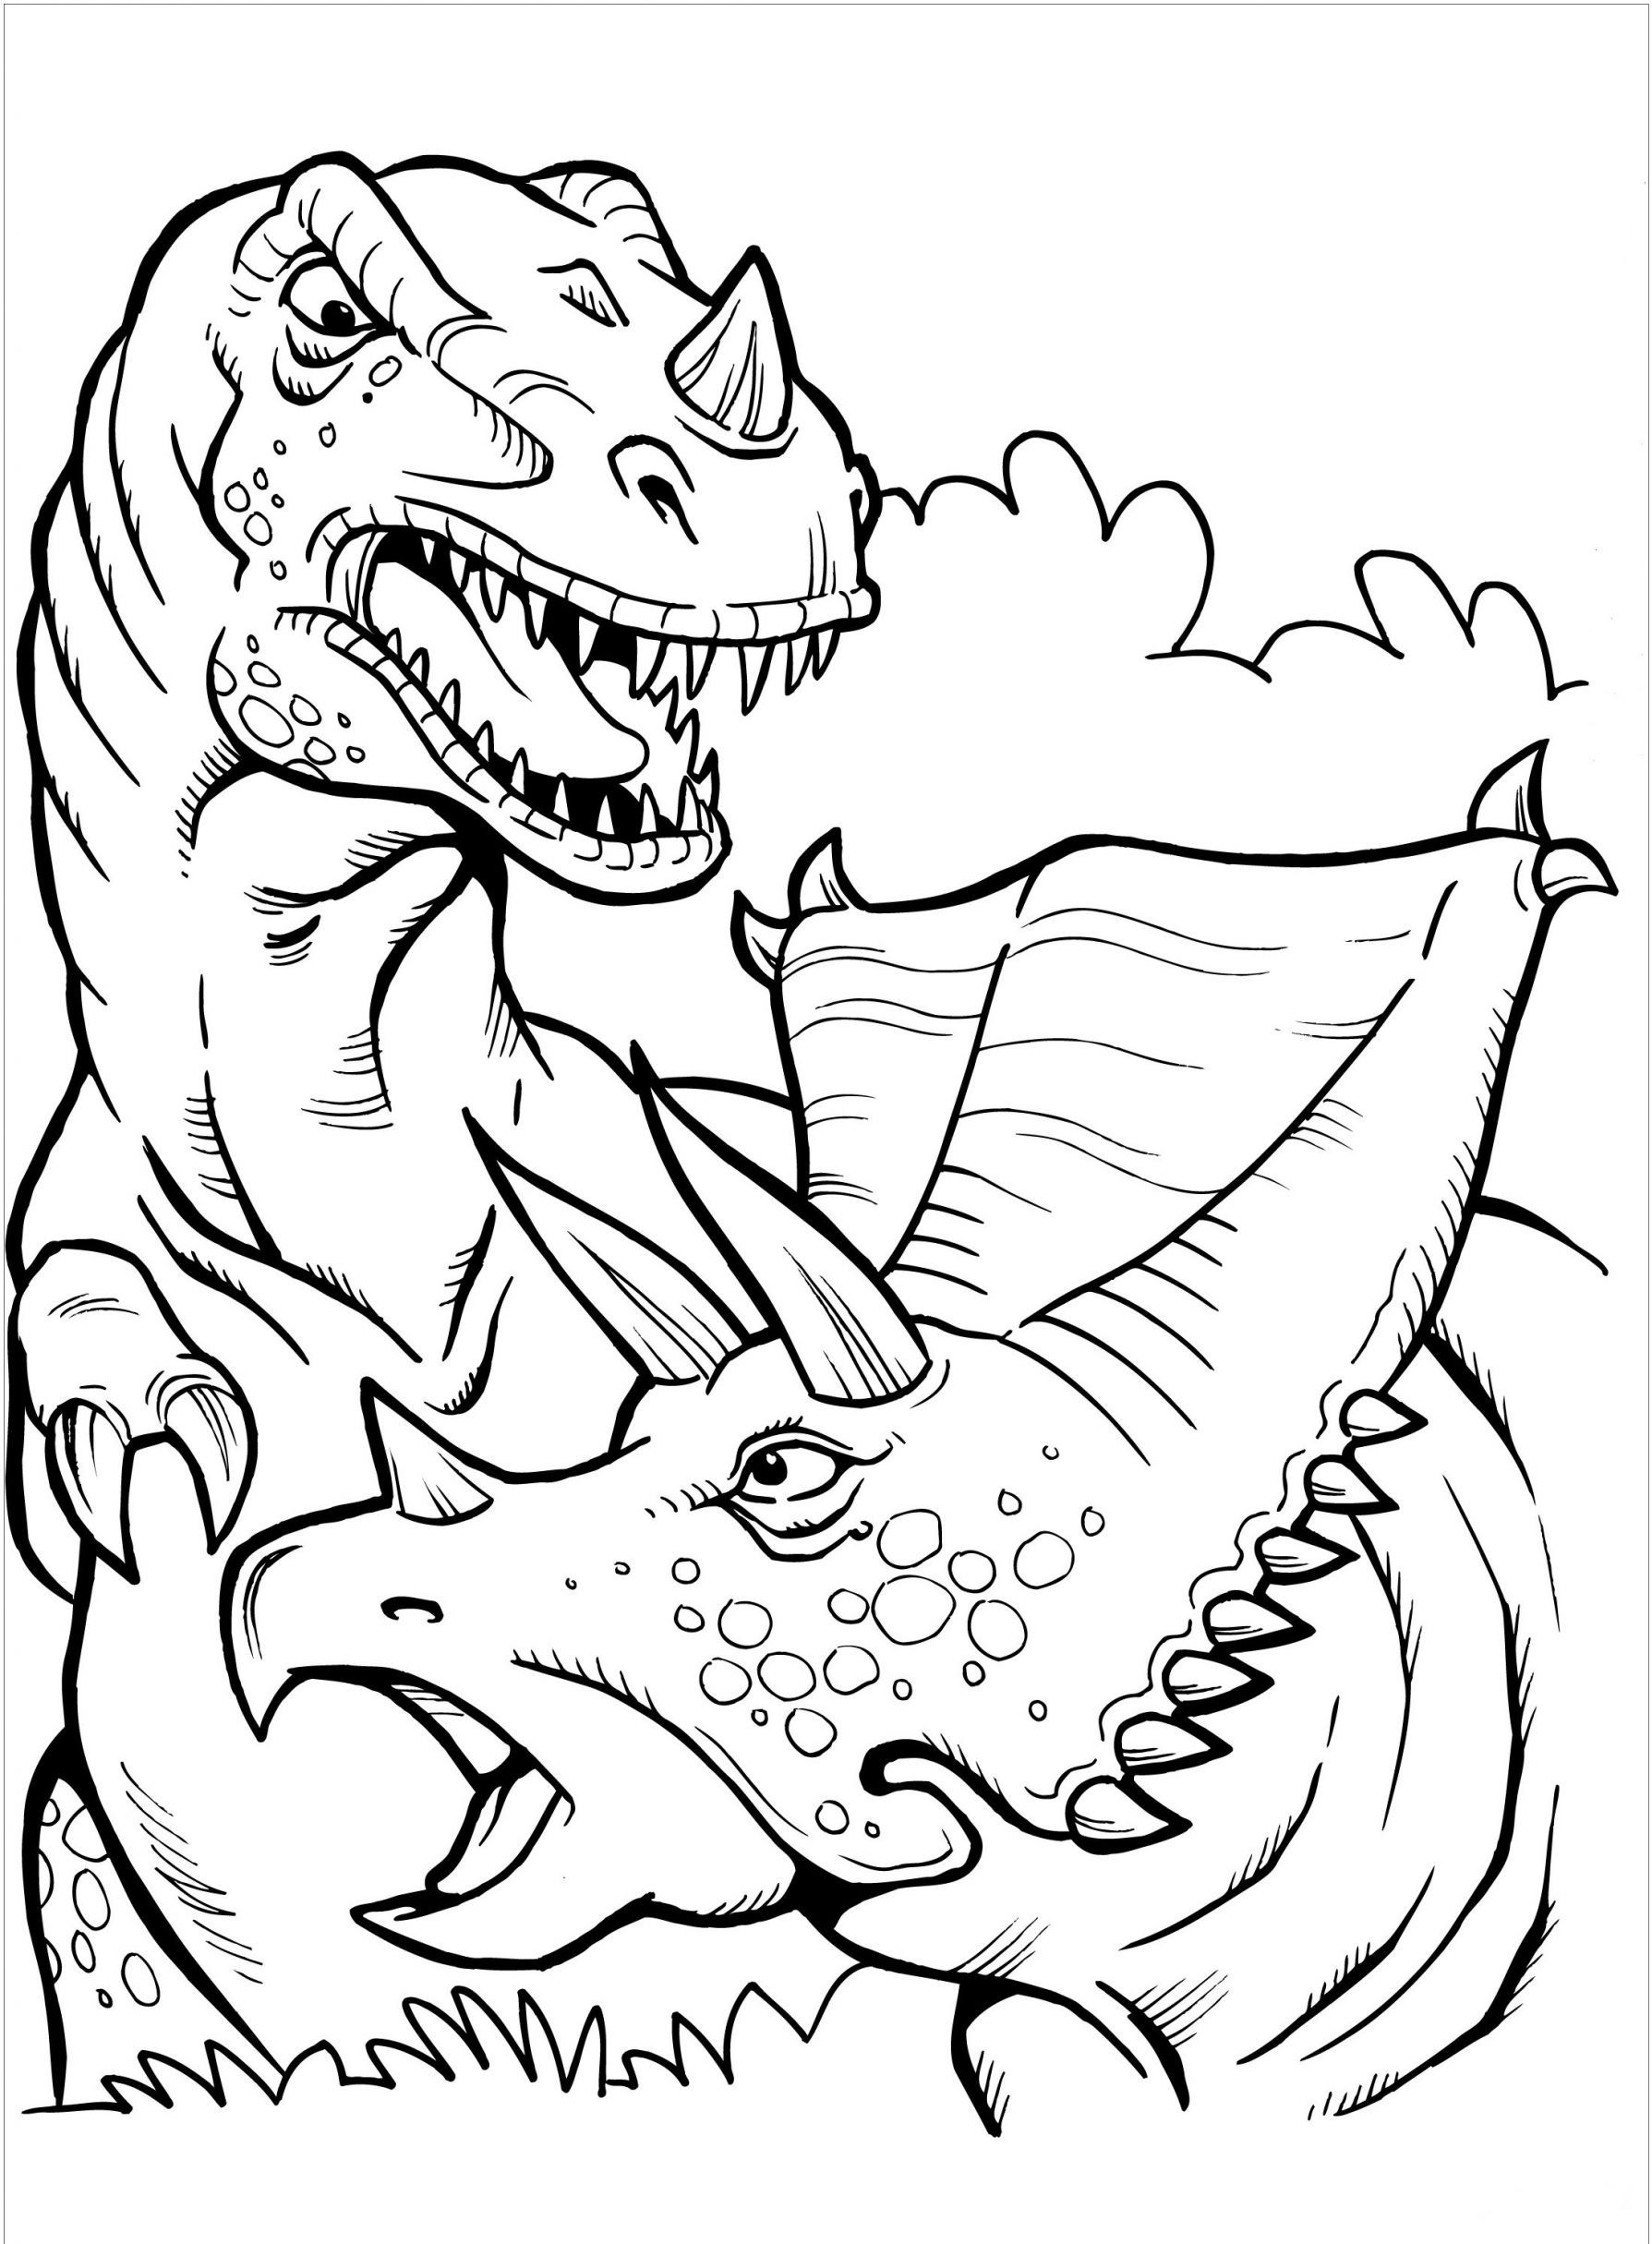 Friends Coloring Page